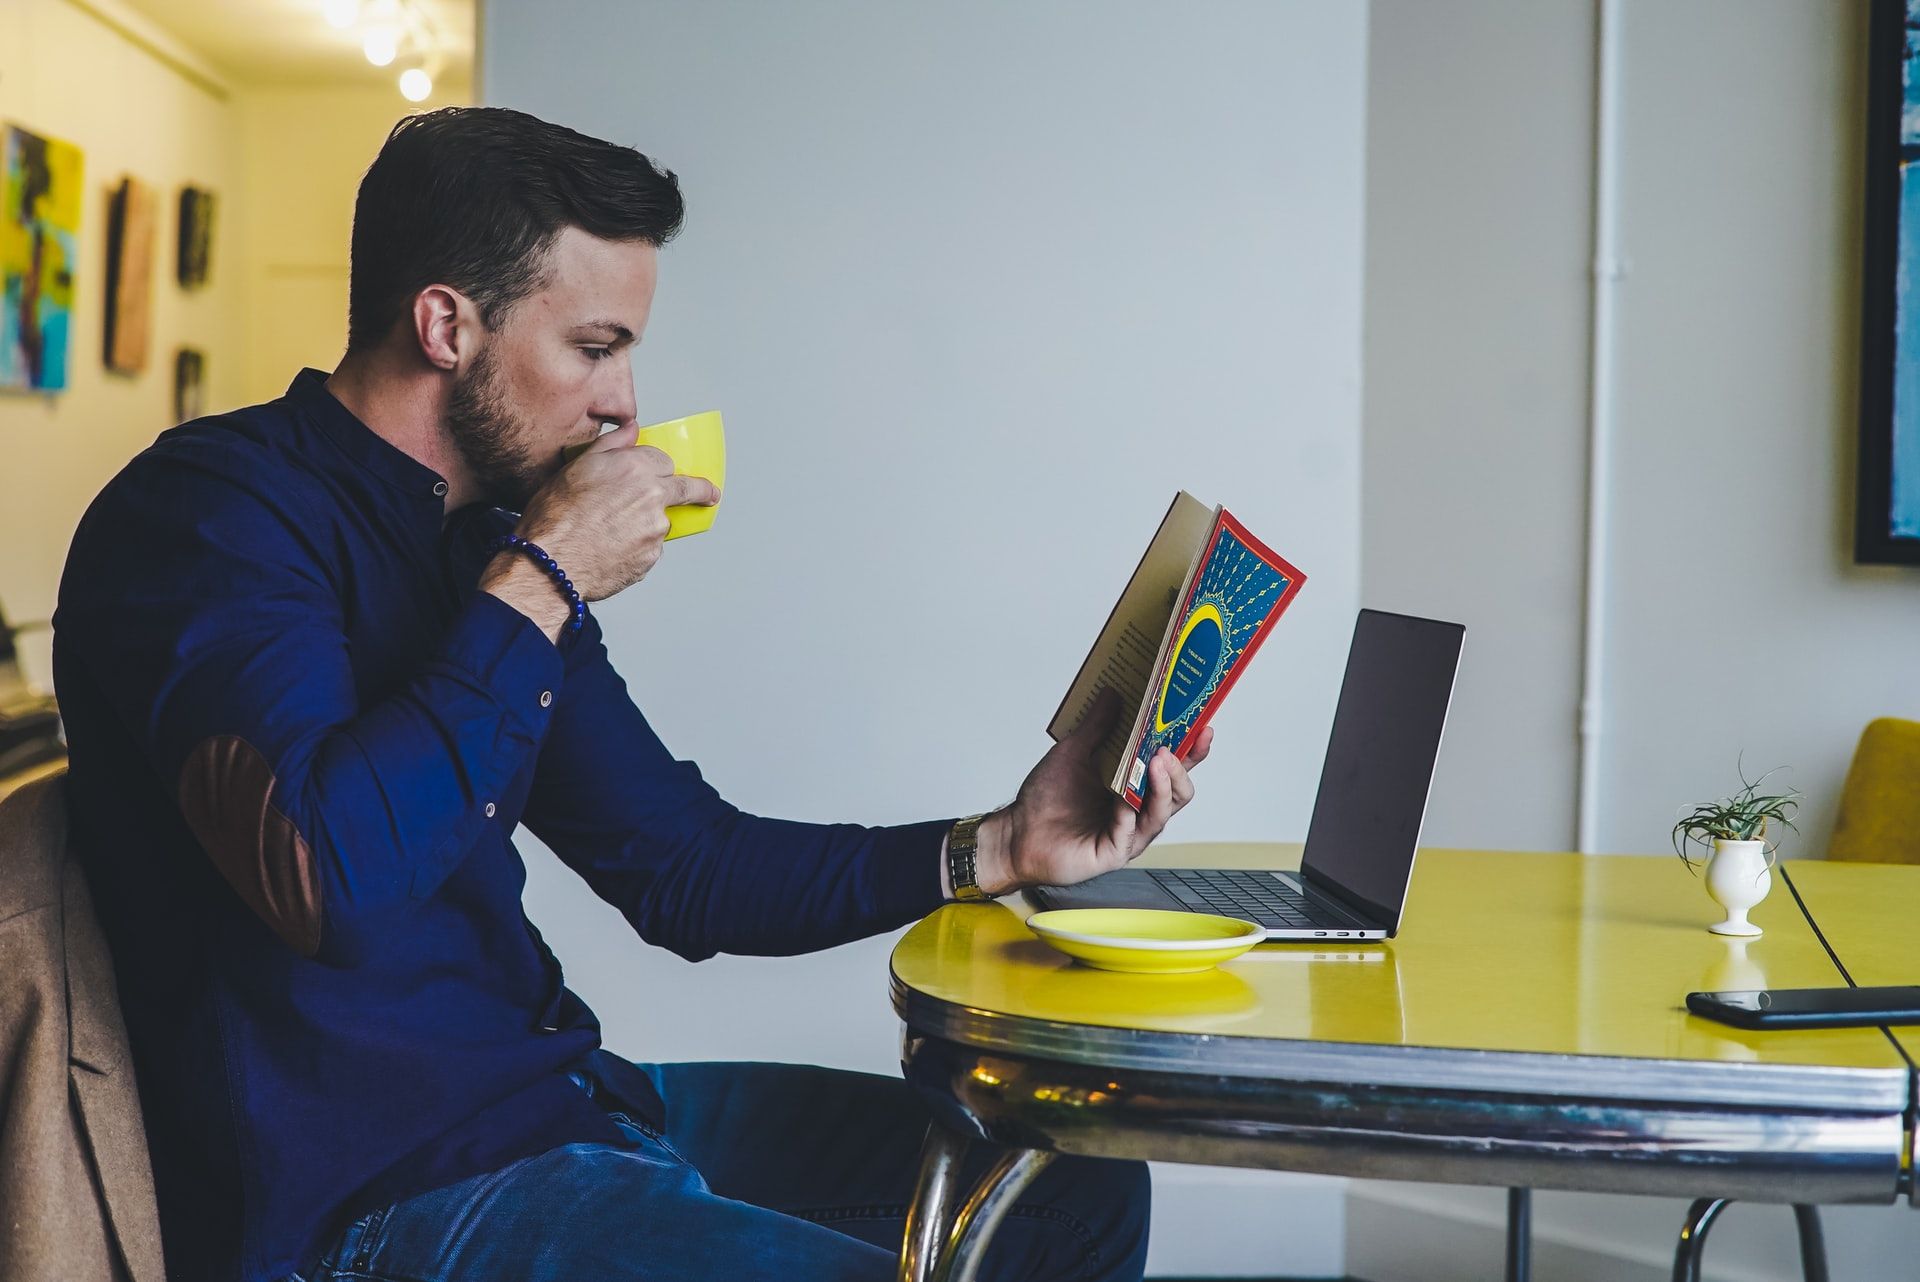 A remote worker sits at his desk, drinking a coffee and reading a book. His laptop is open in front of him.